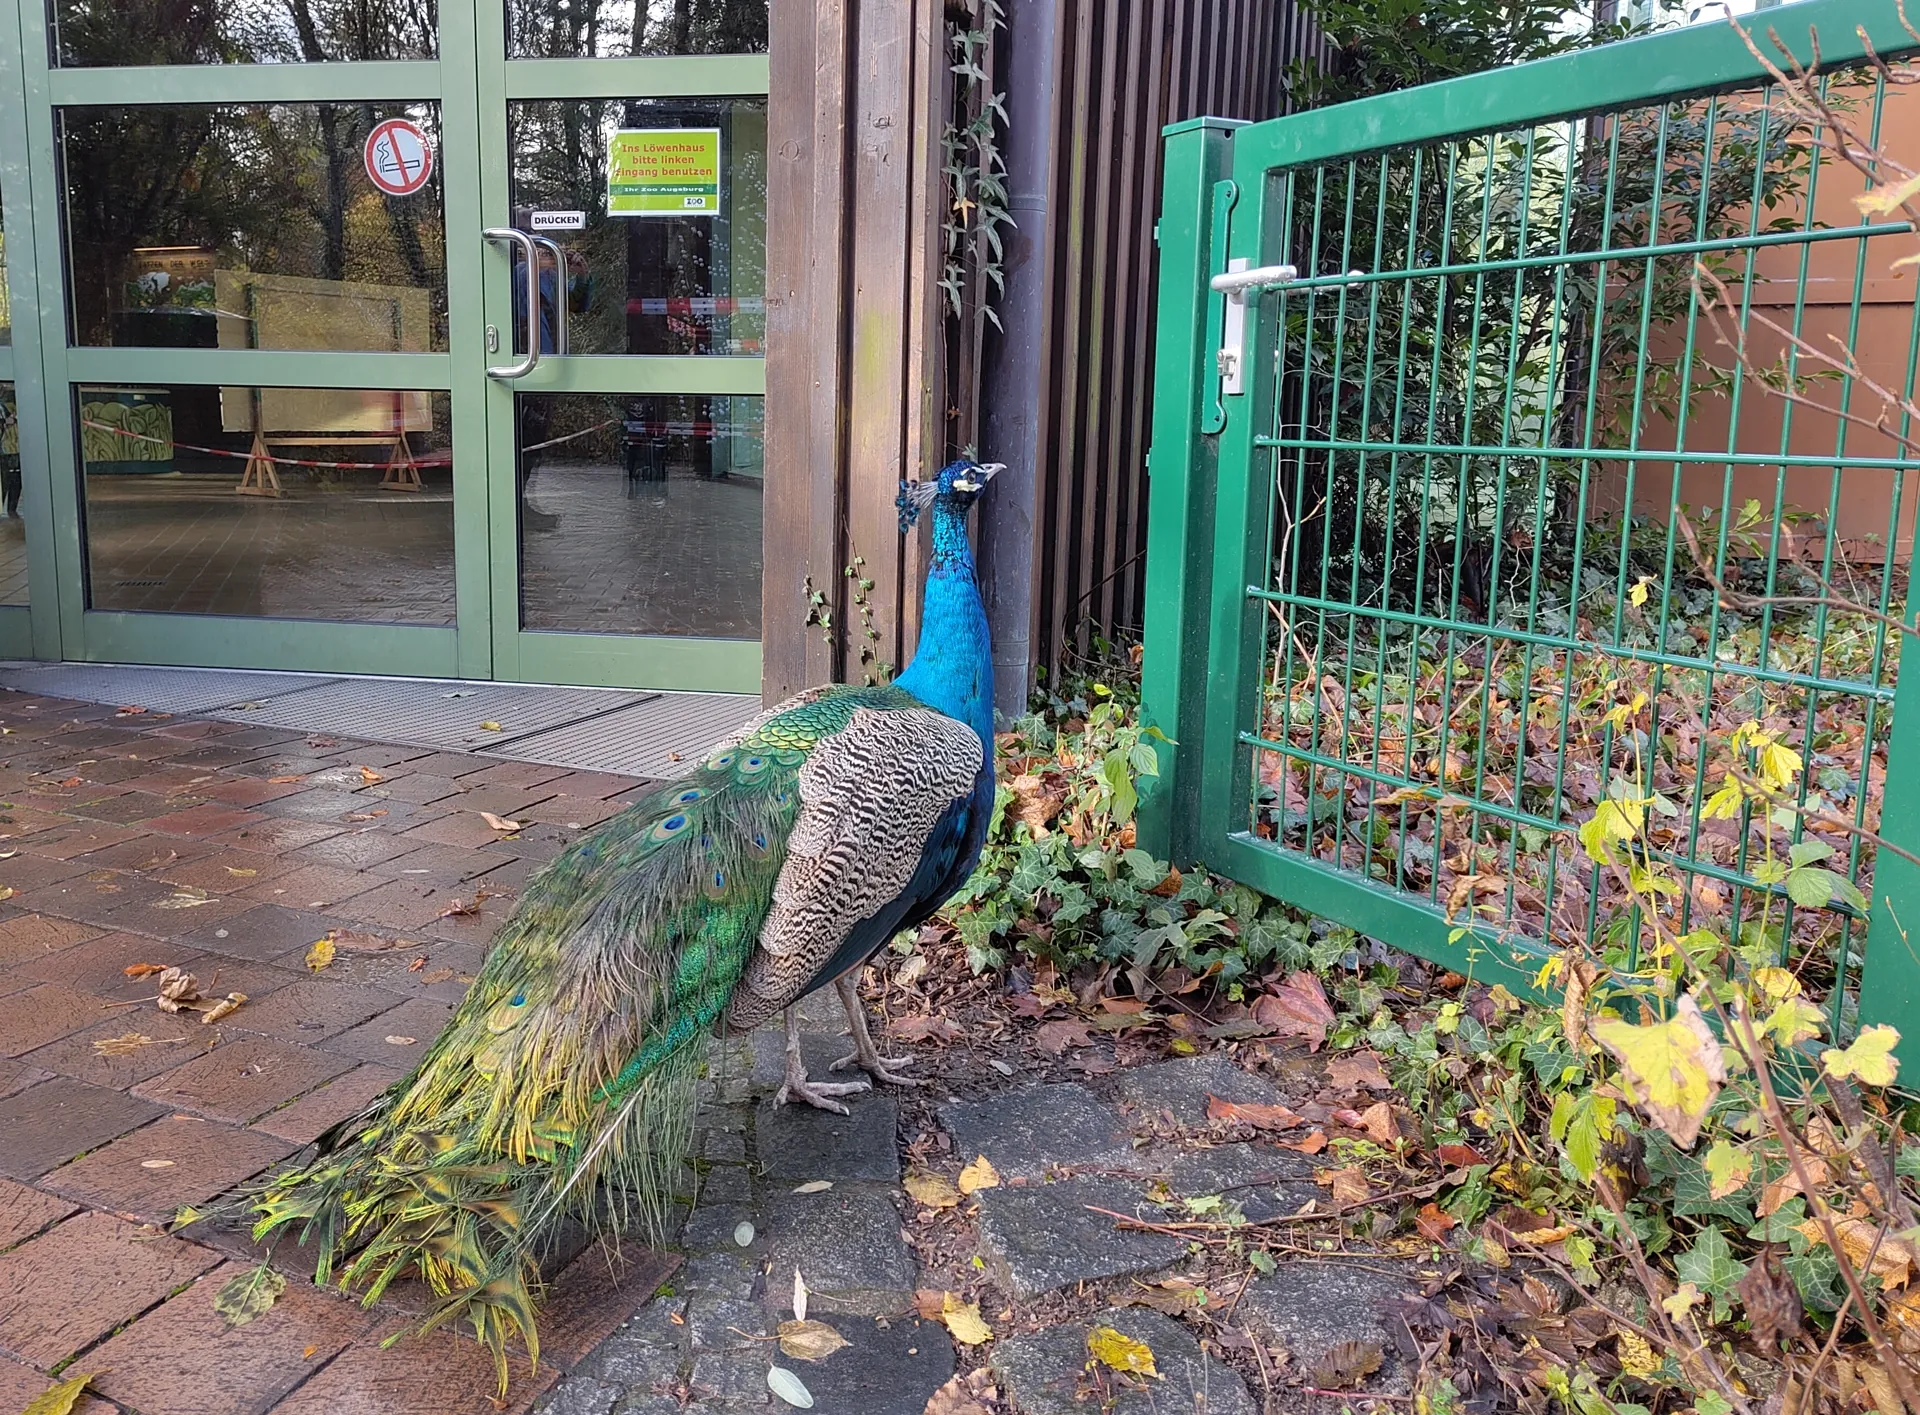 A peacock calculating an escape trajectory and about to jump onto a green gate double its own height. The jump worked.